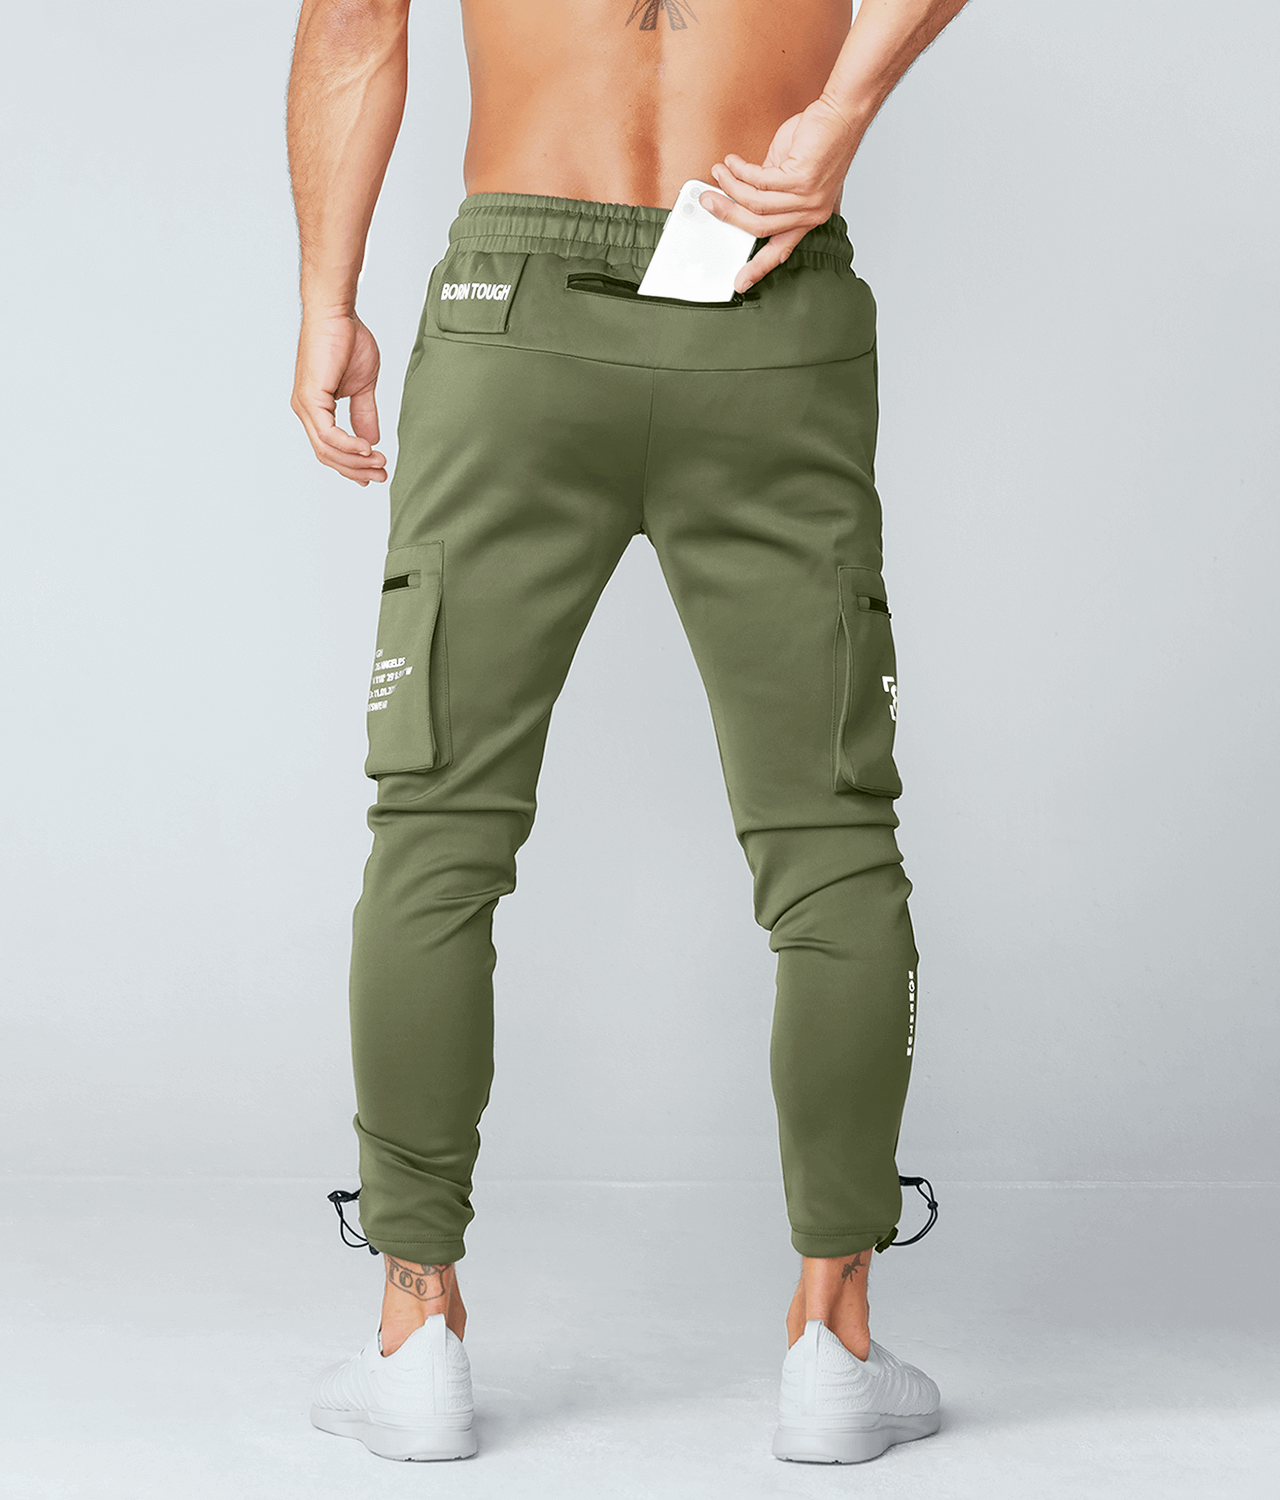 Best Athletic Cargo Pants Nike Cargo Pants  Embrace Your Inner 90s Icon  With These 18 Cargo Pants  POPSUGAR Fashion Photo 7